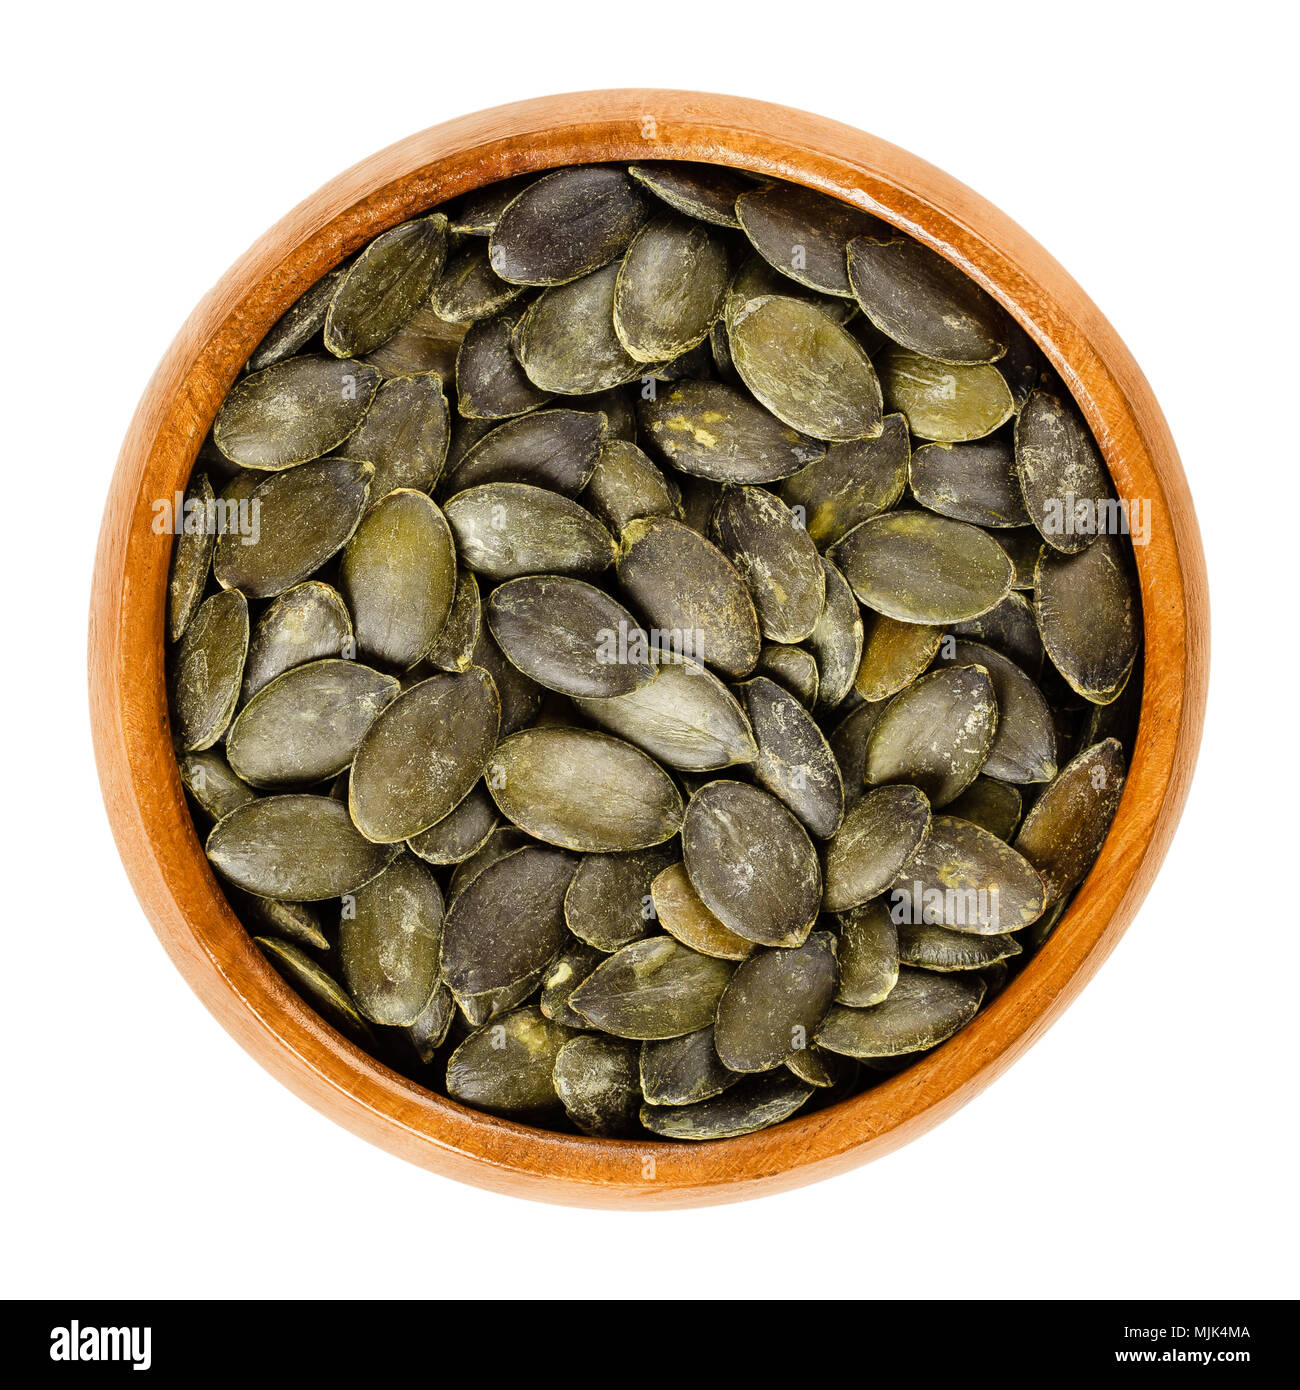 Roasted and salted pepita pumpkin seeds in wooden bowl, used as snack. Flat green edible summer squash seeds of Cucurbita pepo. Isolated macro photo. Stock Photo